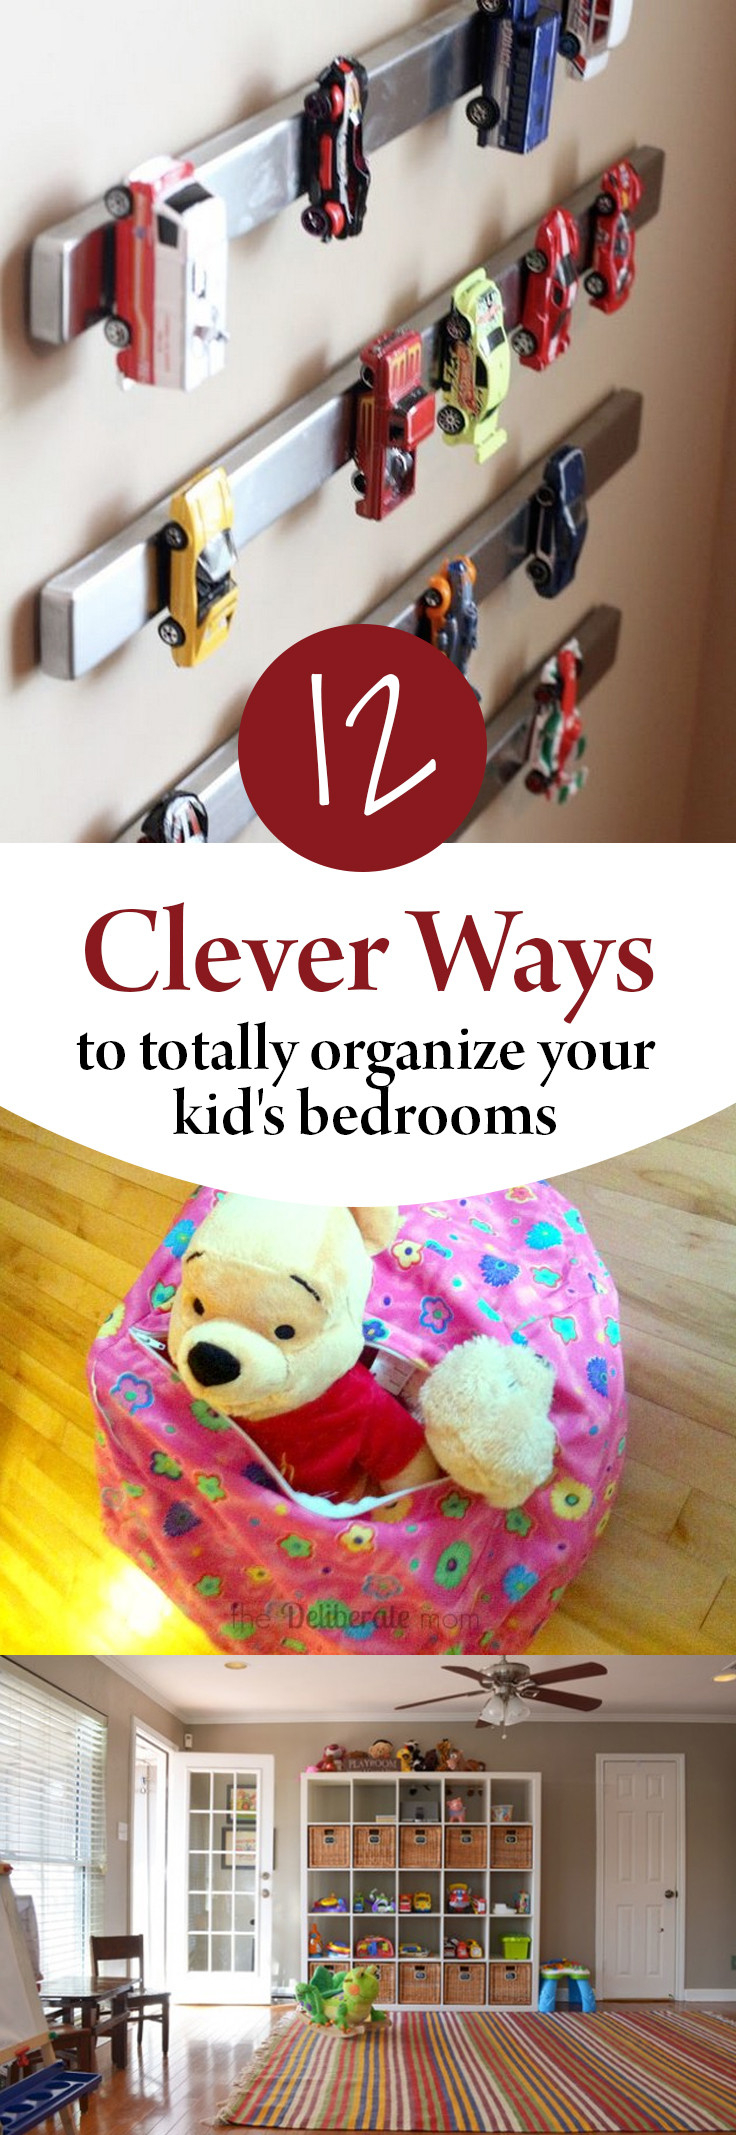 Ways To Organize Kids Room
 12 Clever Ways to Totally Organize Your Kid s Bedrooms